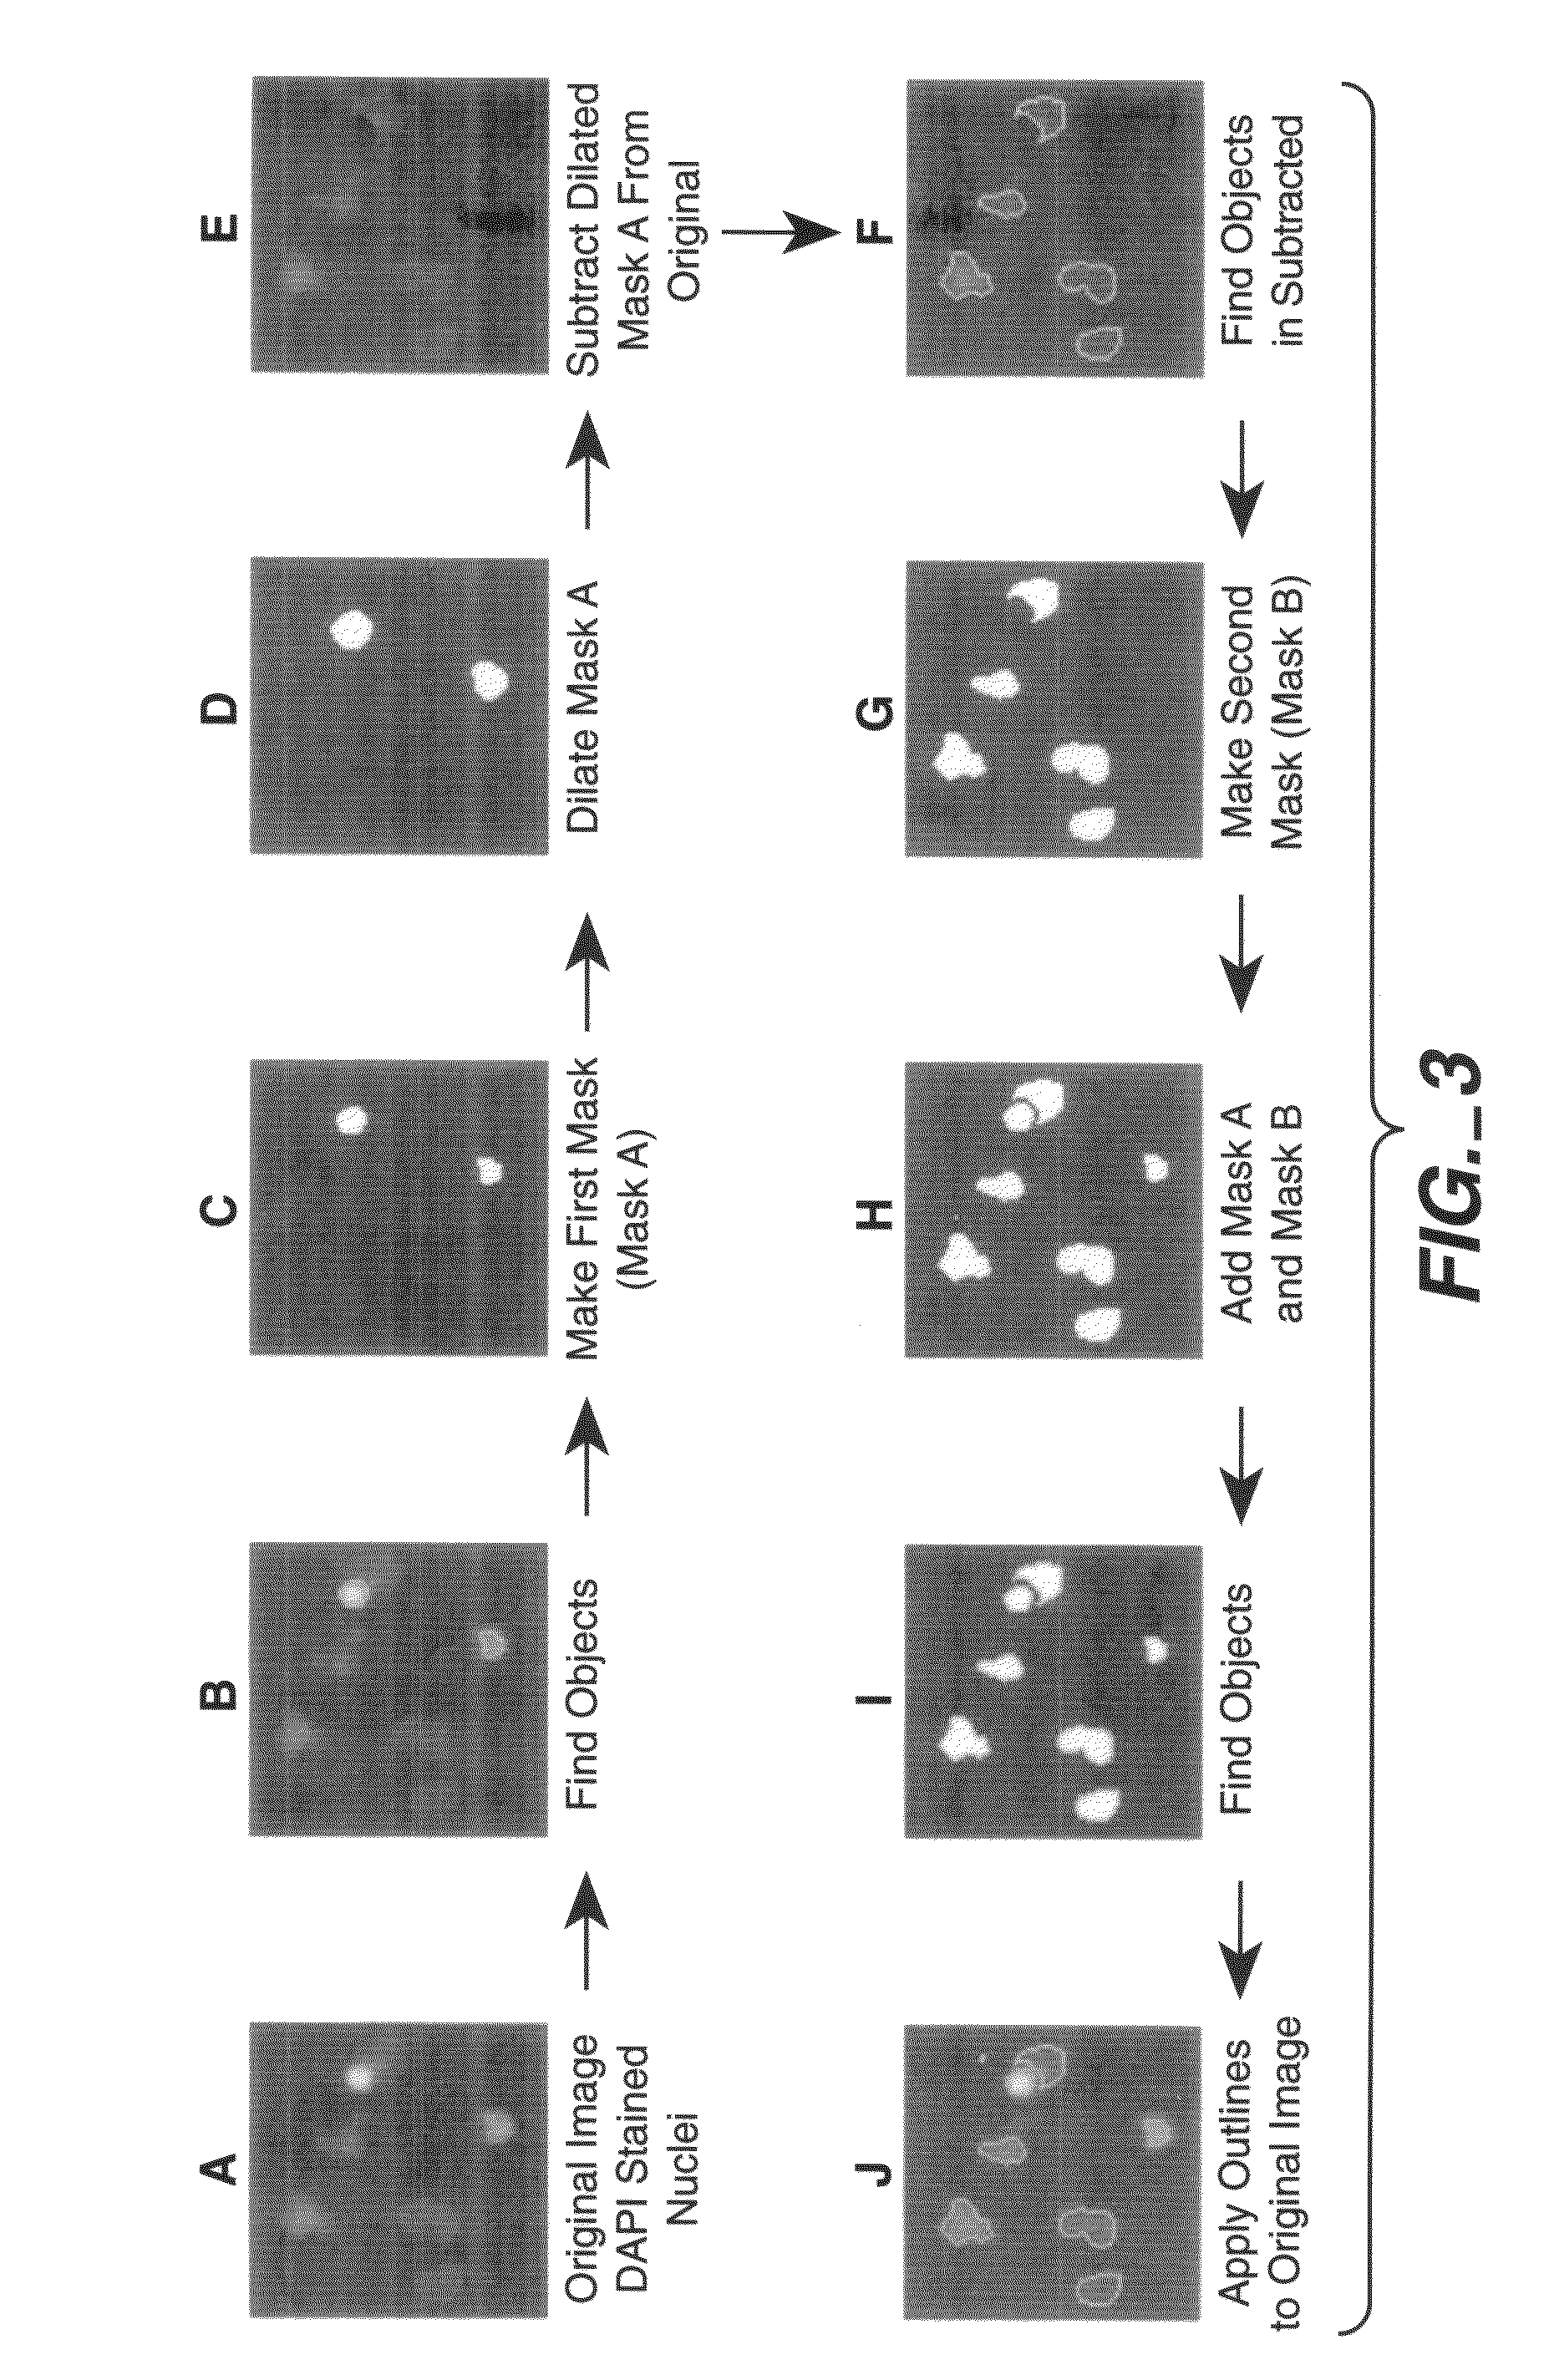 System and method for high-content oncology assay